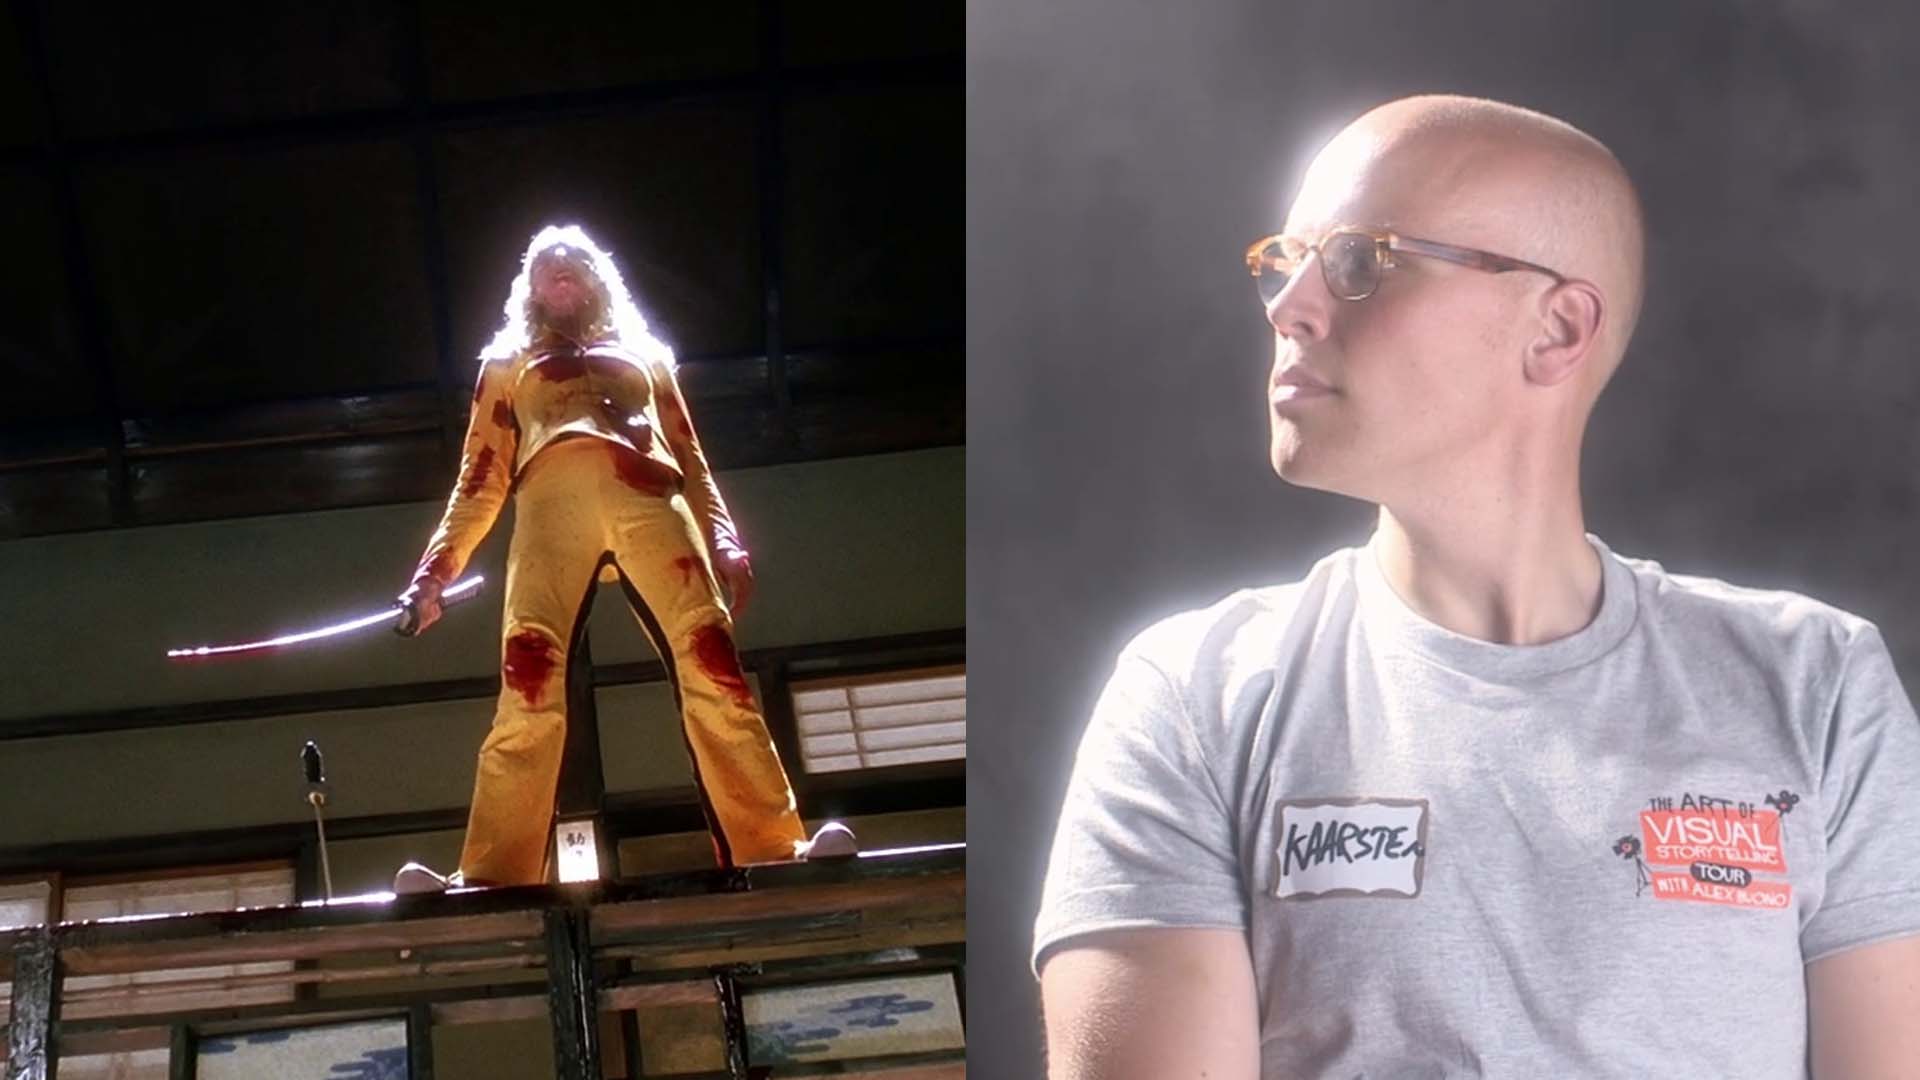 Comparative images of the recreation of the look of Kill Bill and Alex